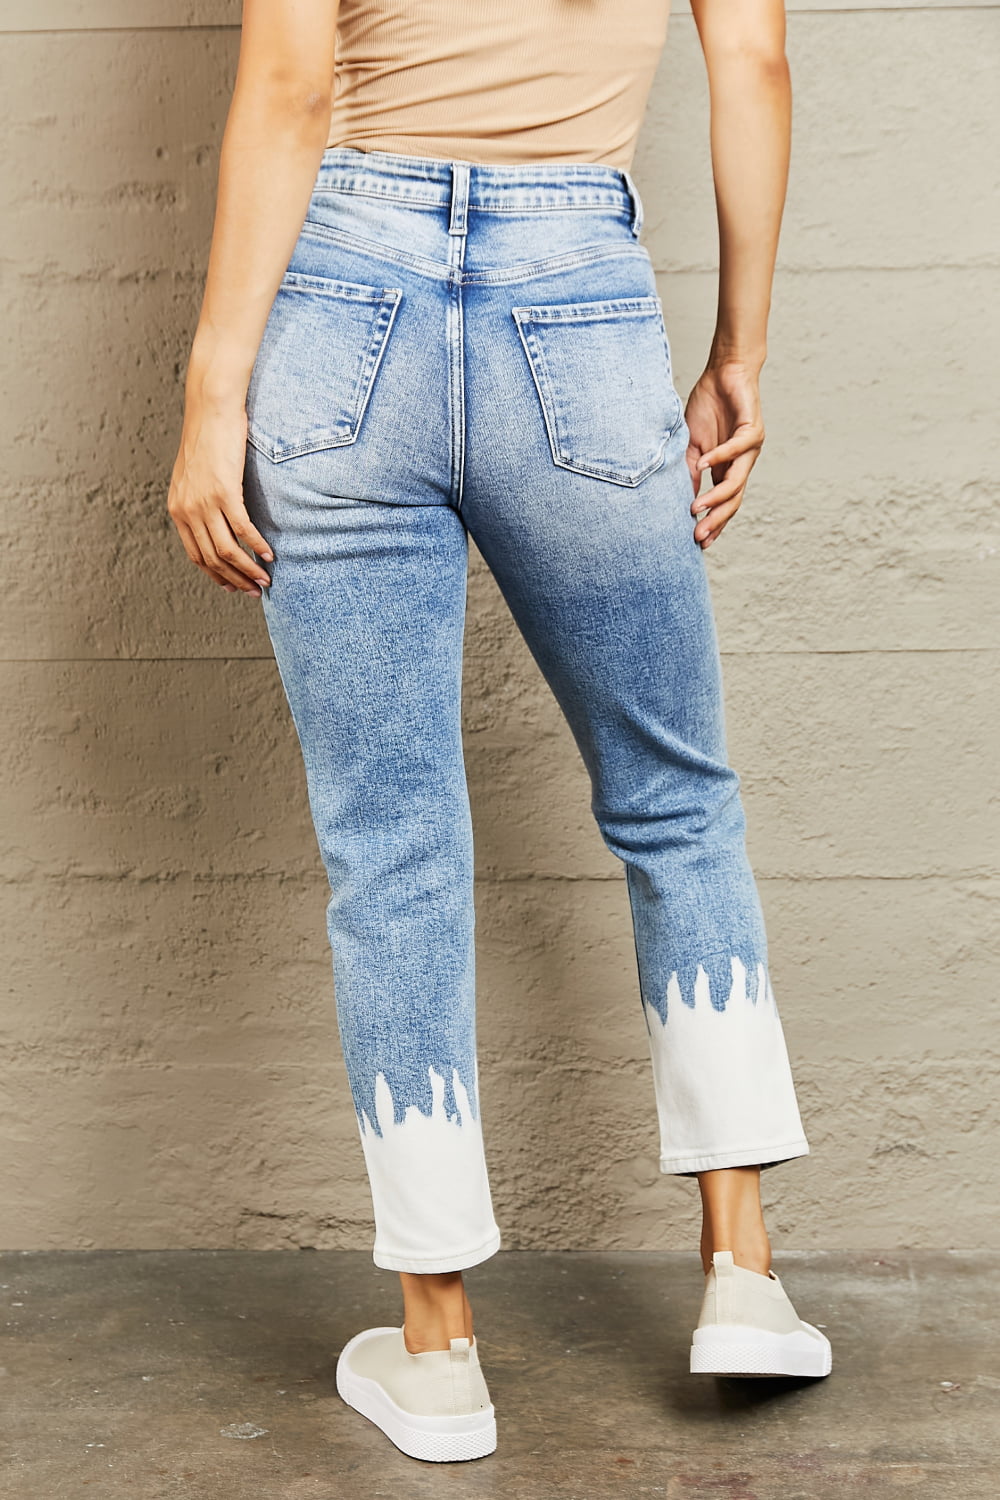 BAYEAS High Waisted Distressed Painted Cropped Skinny Jeans - TRENDMELO